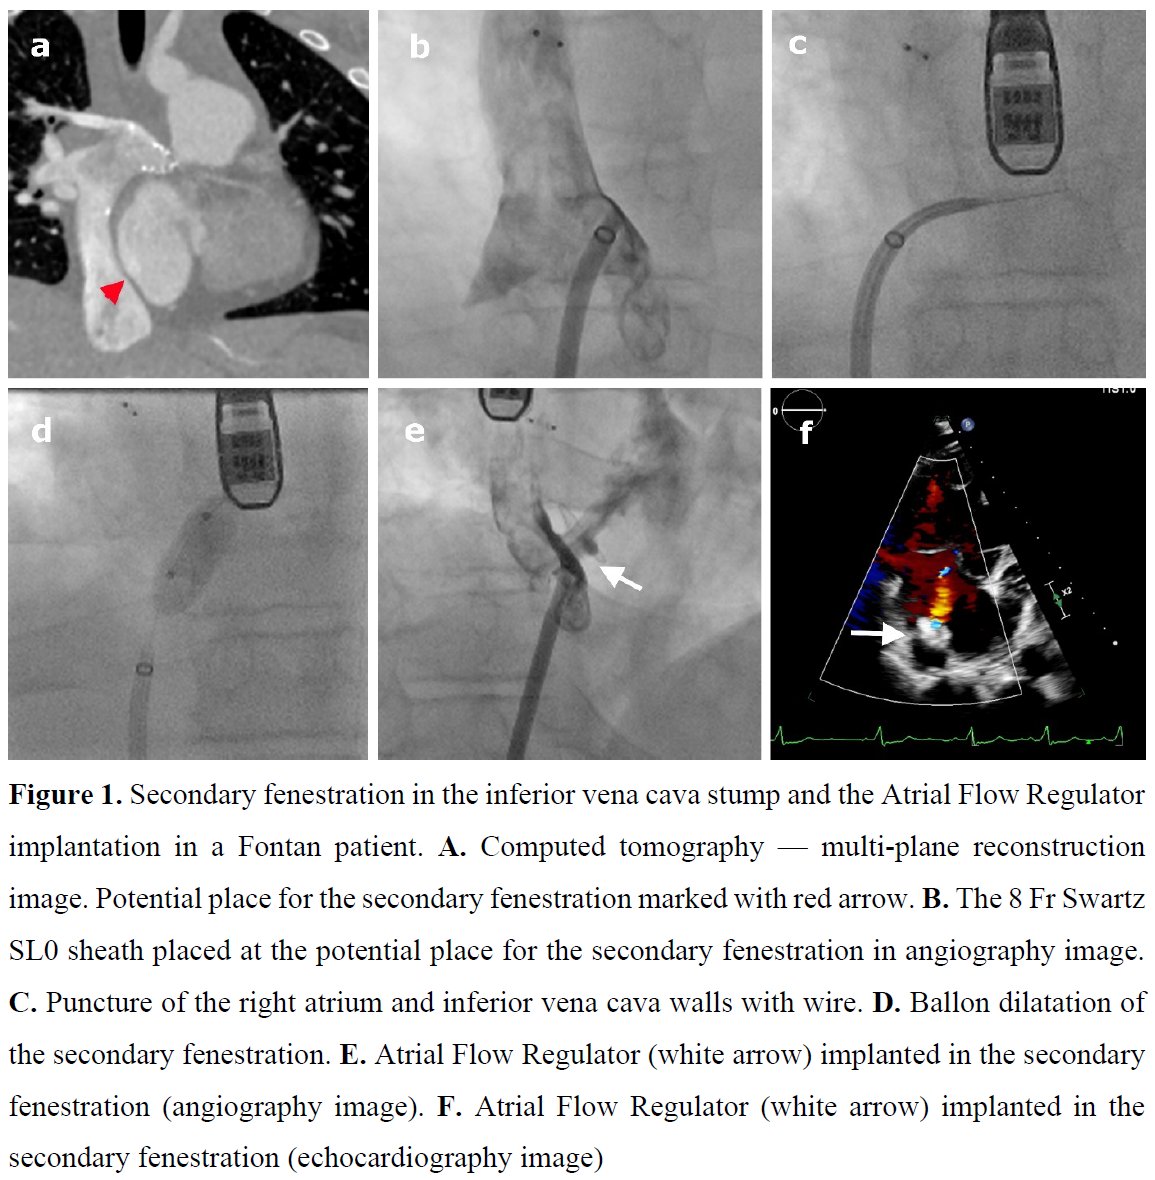 Editors' Insights: Creation of the secondary fenestration in the inferior vena cava stump with the occlutech atrial flow regulator implantation in a #Fontan patient. tiny.pl/ddkvd #PolishHeartJournal #CardioTwitter #HeartNews #Cardiology @PUMS_tweets